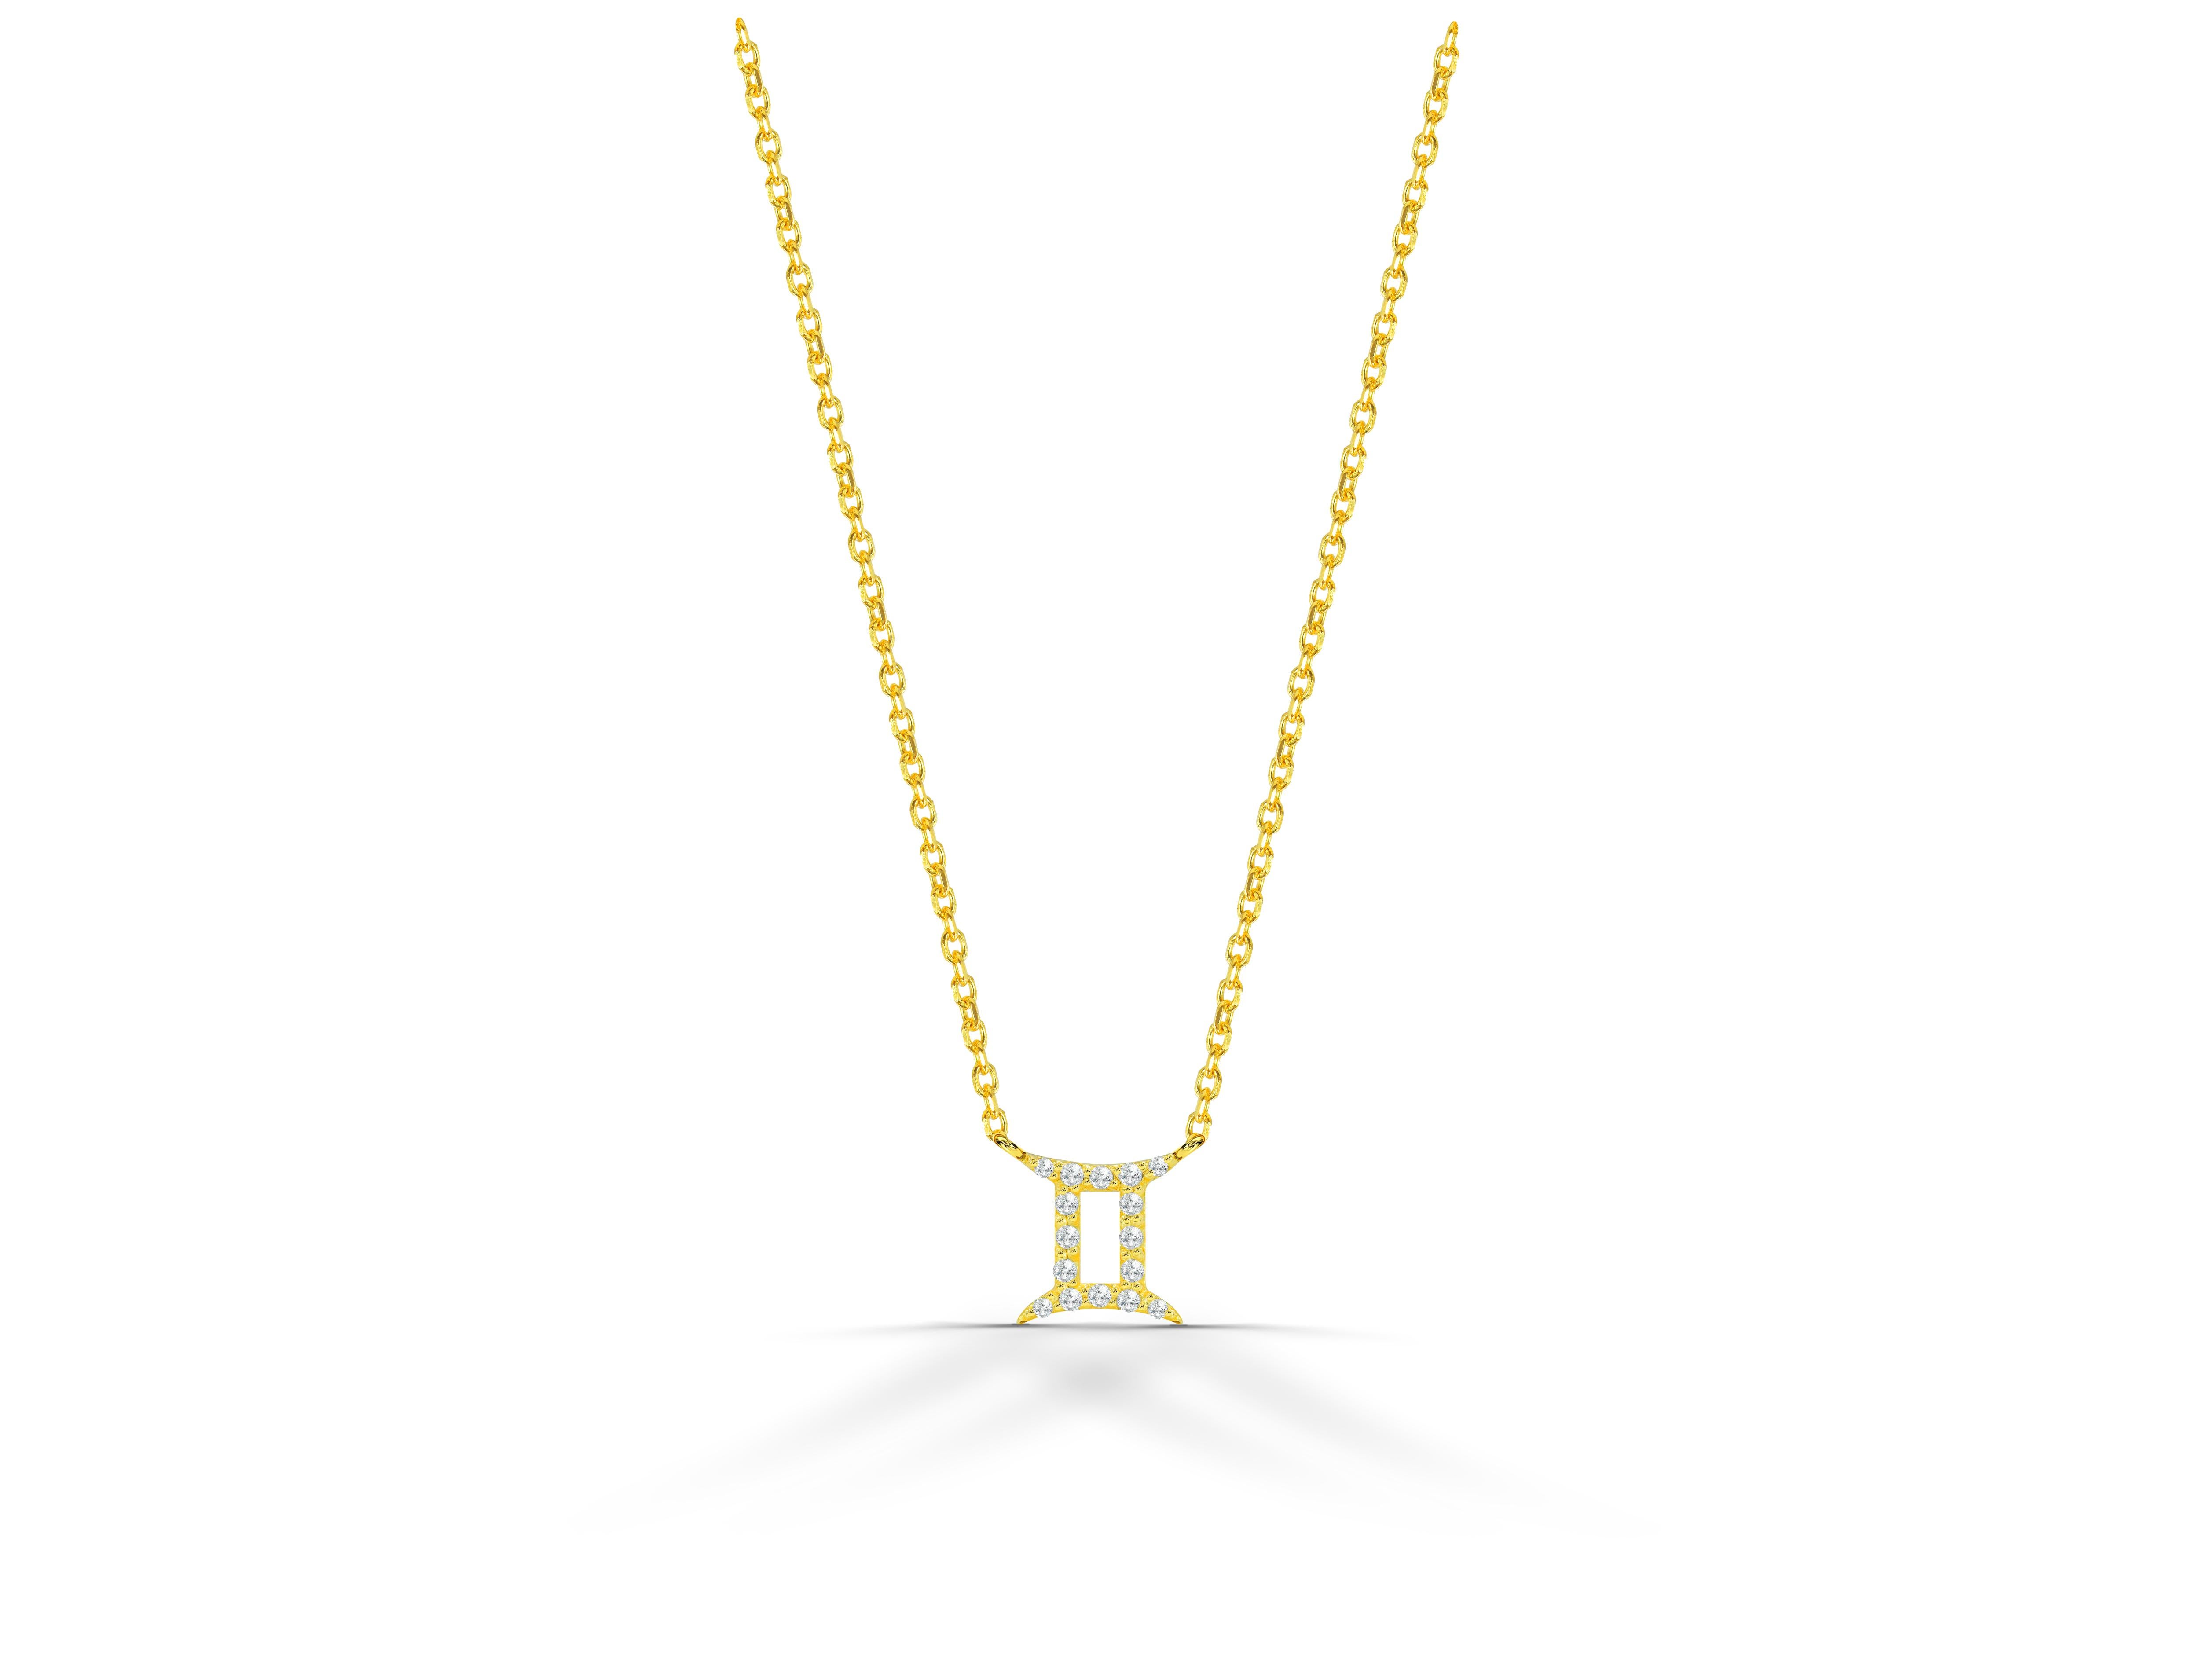 Beautiful and Sparkly Diamond Gemini Necklace made of 18k solid gold.
Available in three colorsof gold: Rose Gold / White Gold / Yellow Gold.

Natural genuine round cut diamond each diamond is hand selected by me to ensure quality and set by a